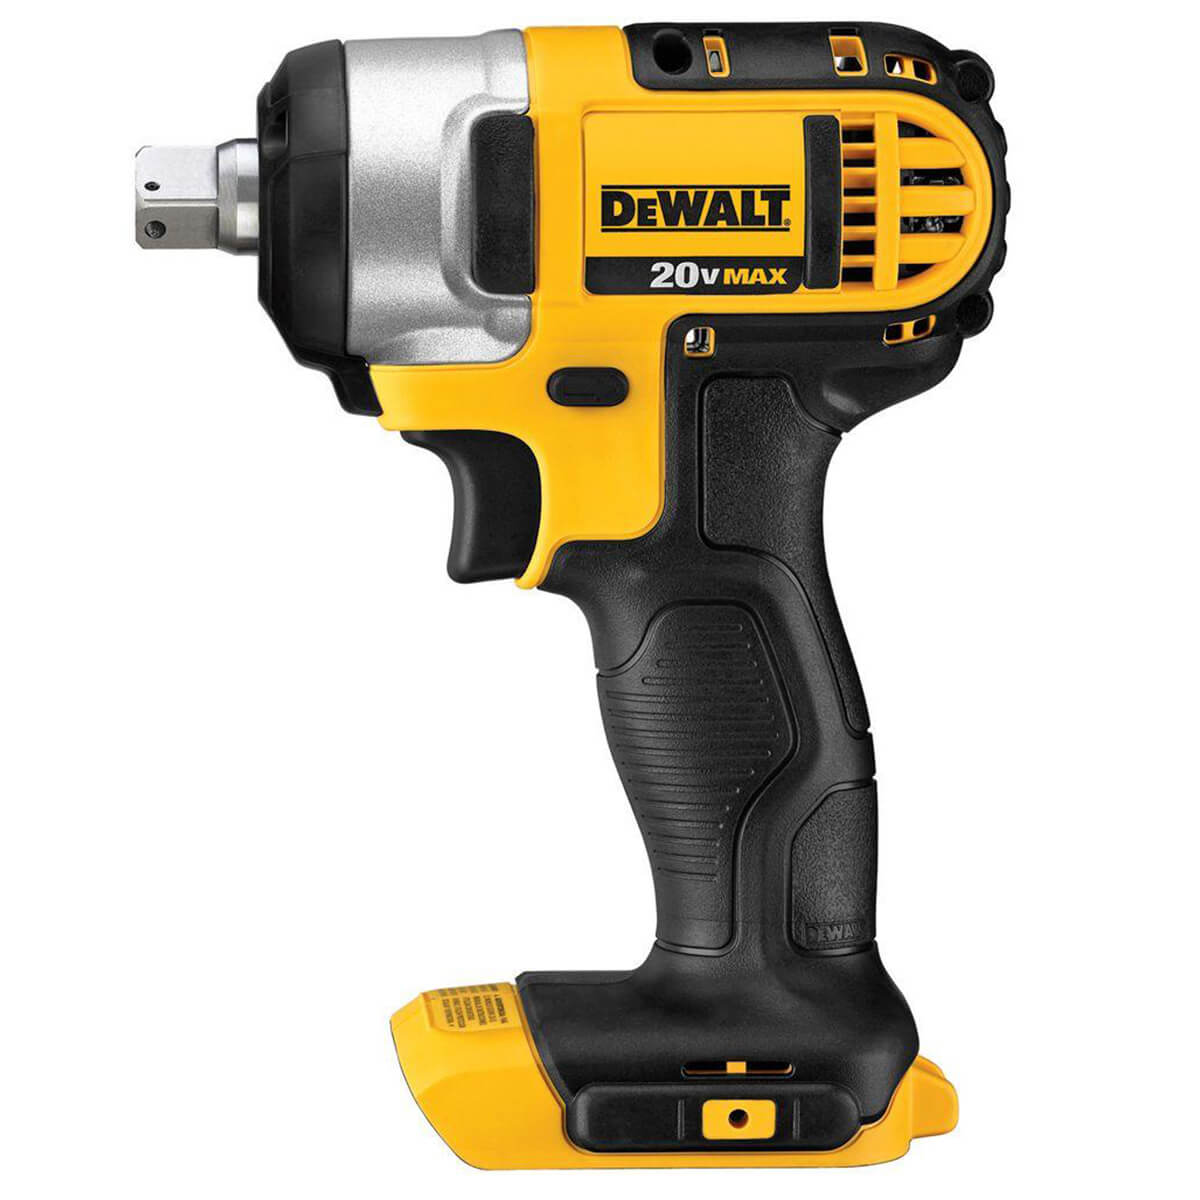 DEWALT 20V MAX* 1/2" Impact Wrench (Tool Only)